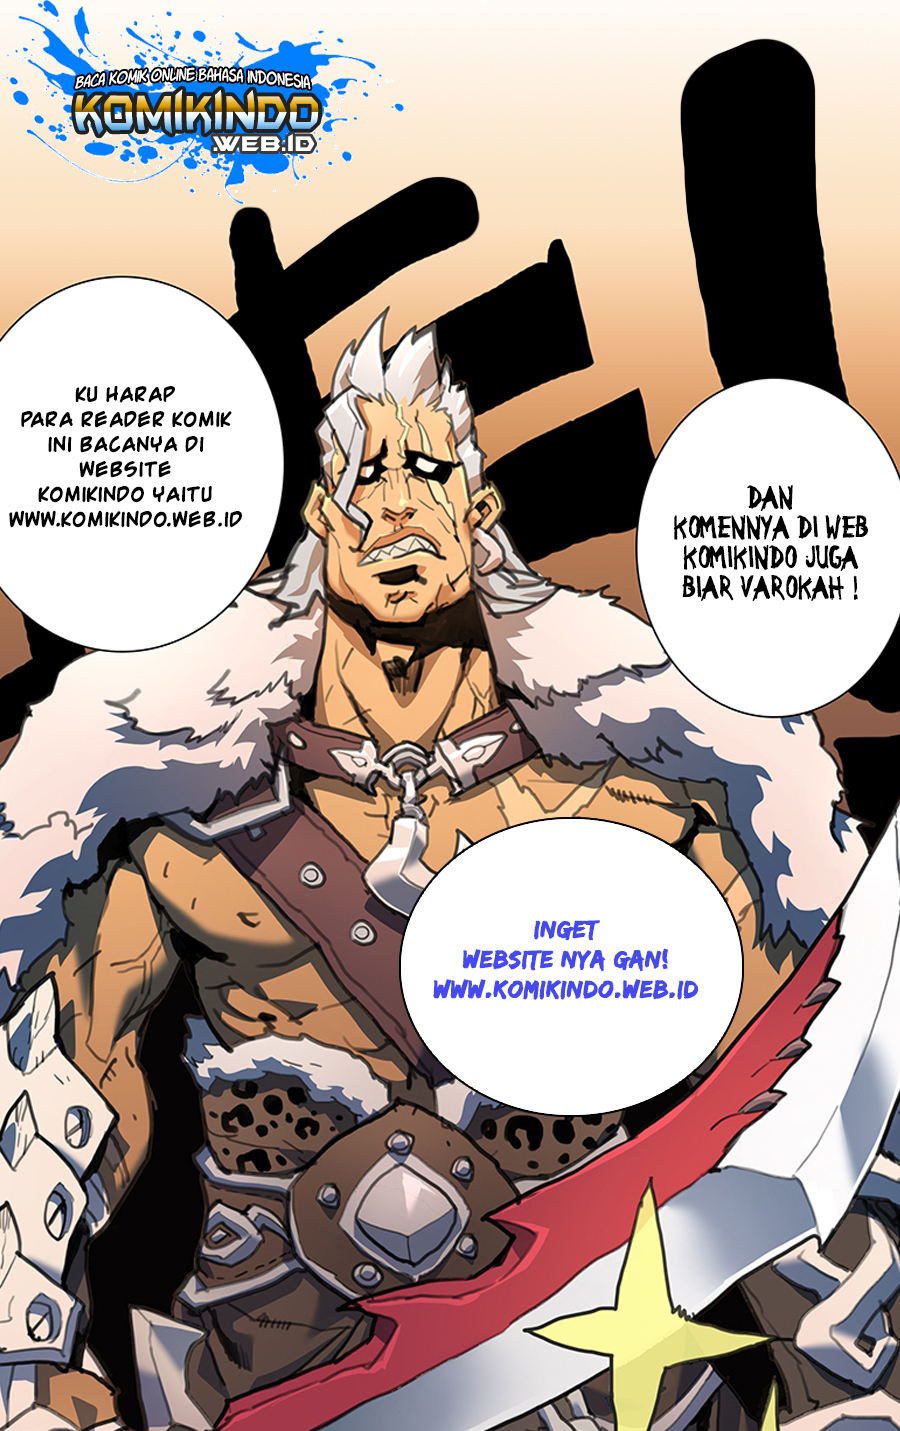 Lord Xue Ying Chapter 7-3